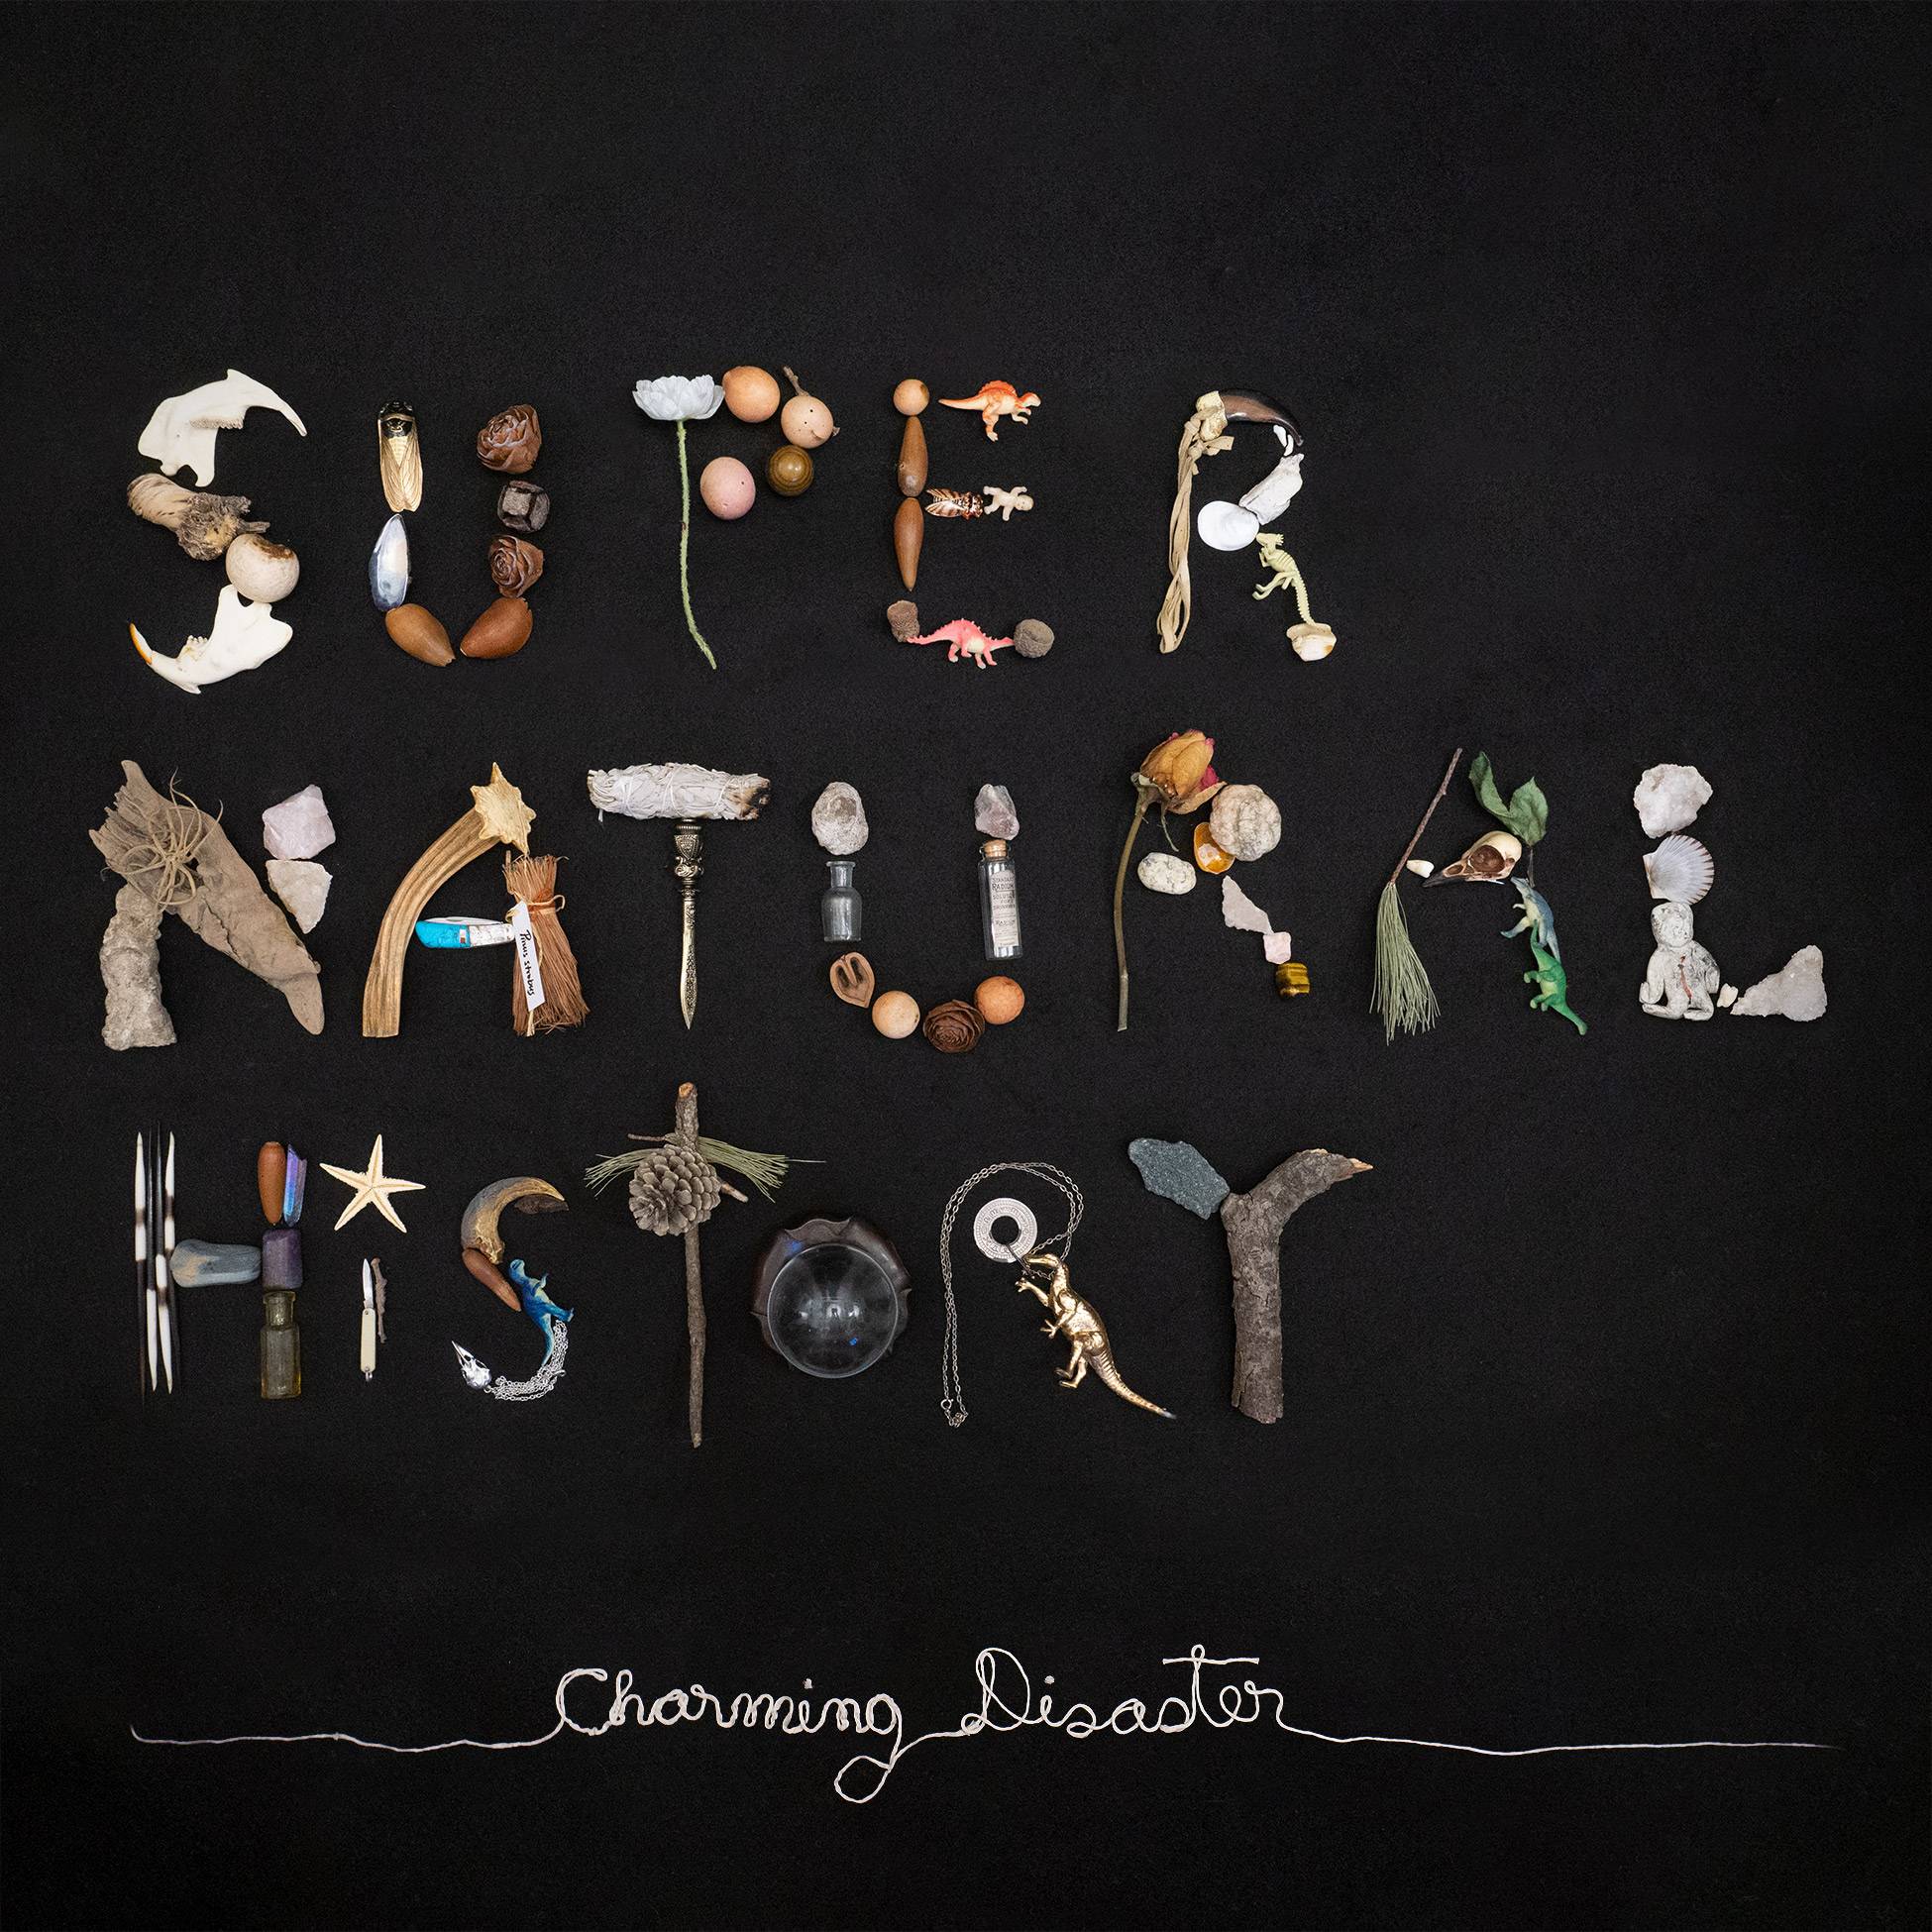 Artwork for the album ‘Super Natural History’ by Charming Disaster